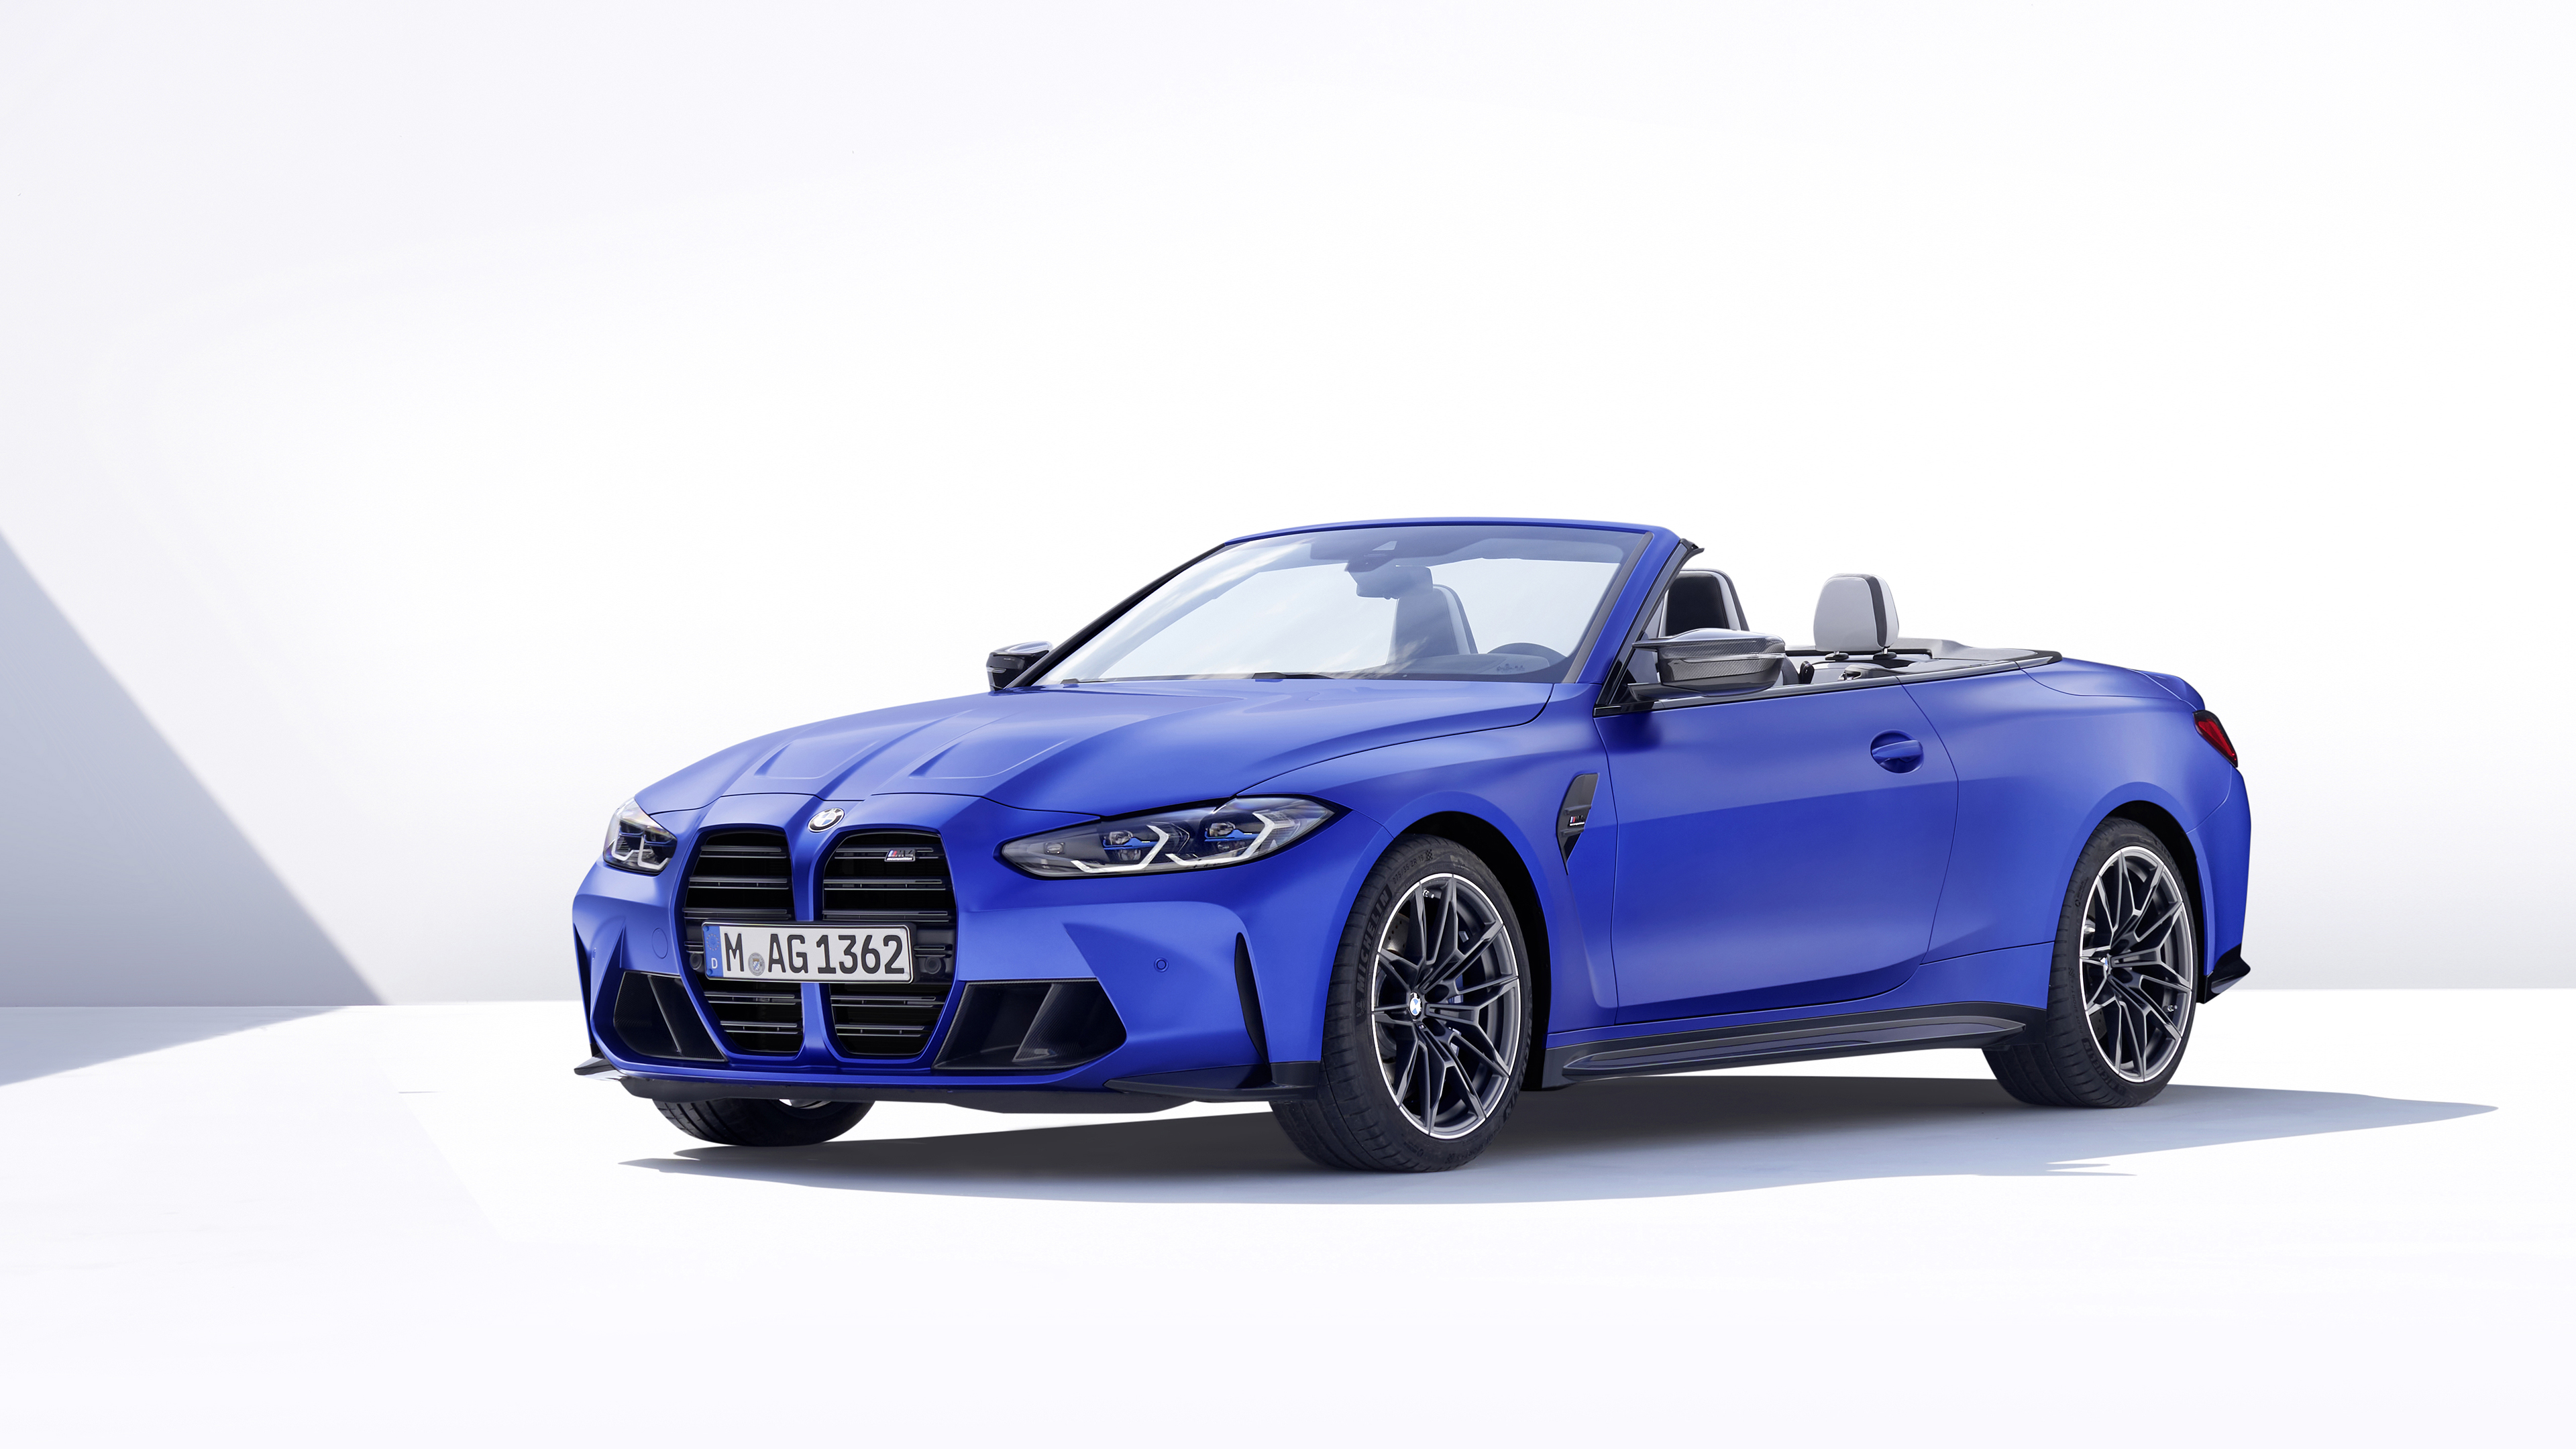 BMW BMW M4 Convertible Cabriolet Blue Cars Sports Car Simple Background 3840x2160